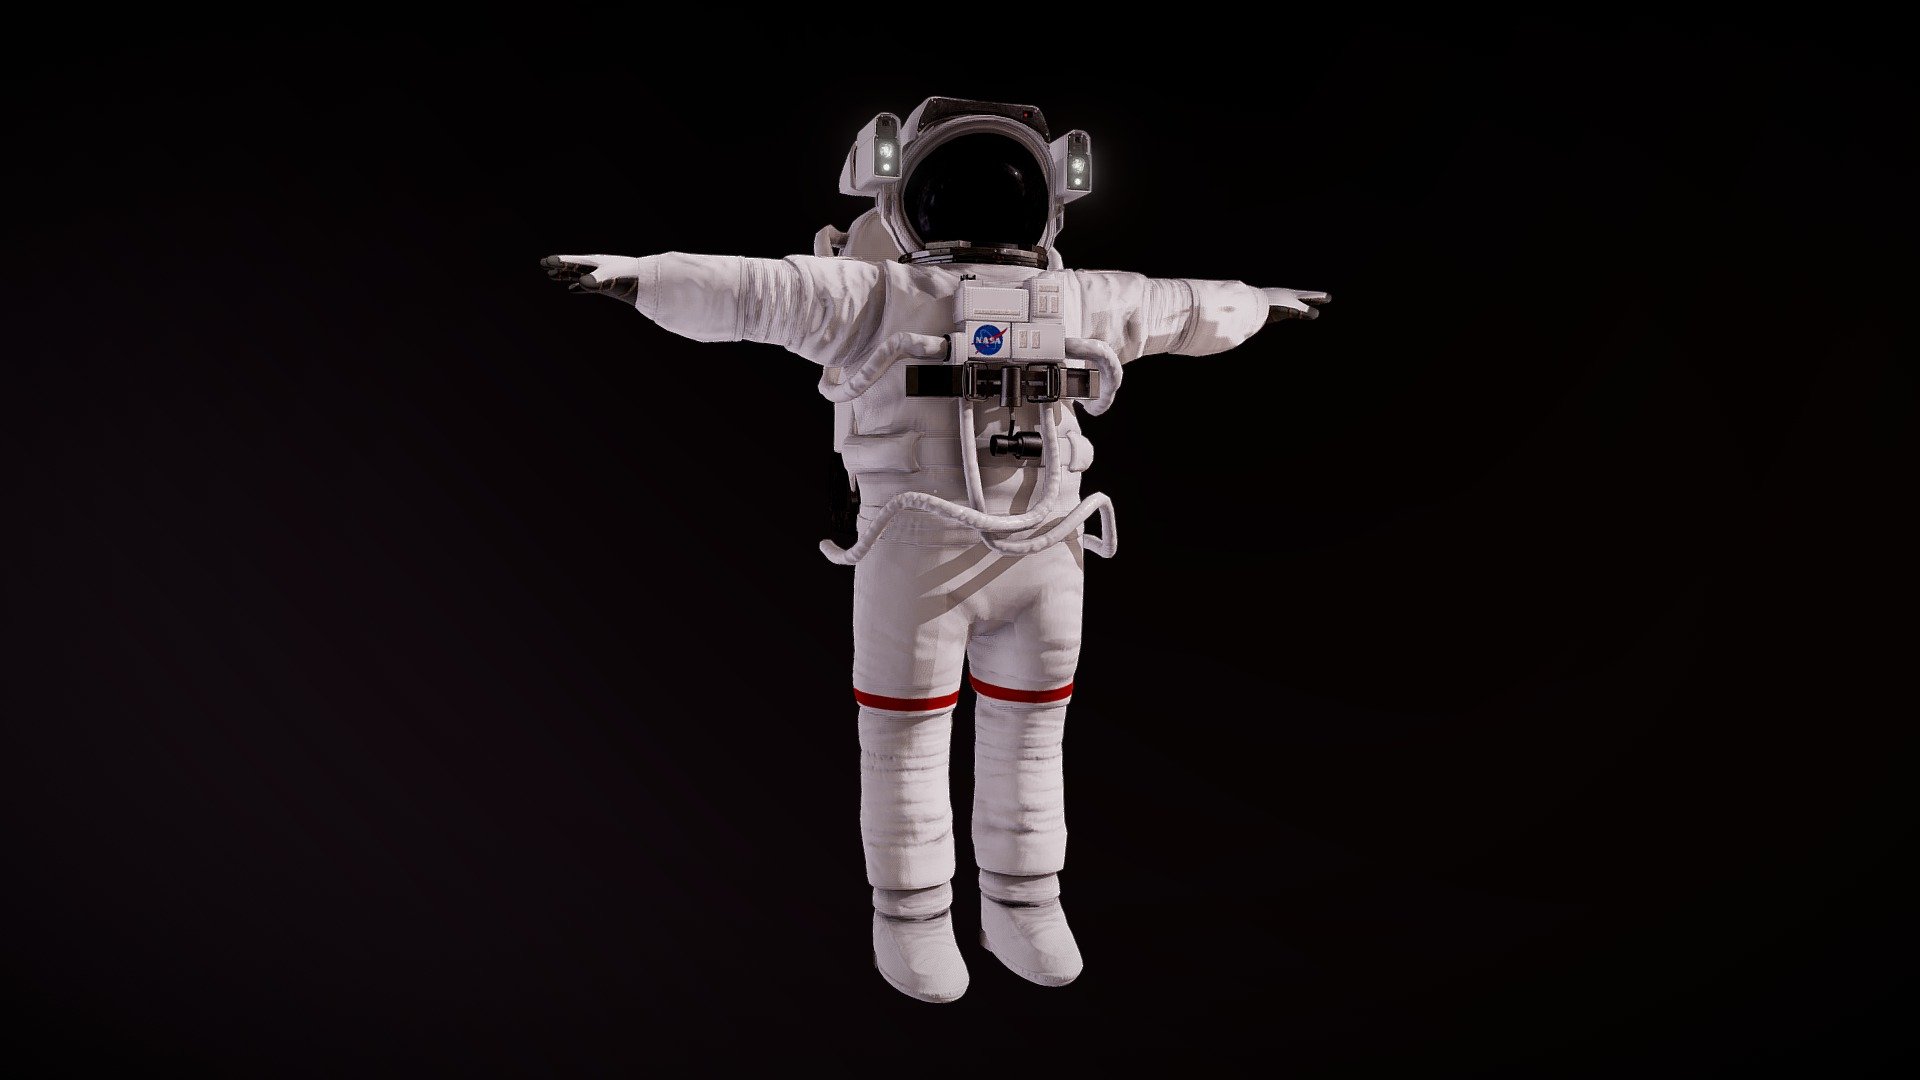 High quality 3D model of a NASA astronaut.

Rigged to work and animate with humanoid systems such as Mixamo and Mecanim (Animations are not included in this pack)

4 sets of 4096x4096 textures, each has Albedo, Normal, Metallic, AO and Emission where needed - NASA Astronaut - 3D model by NoodleStudio 3d model